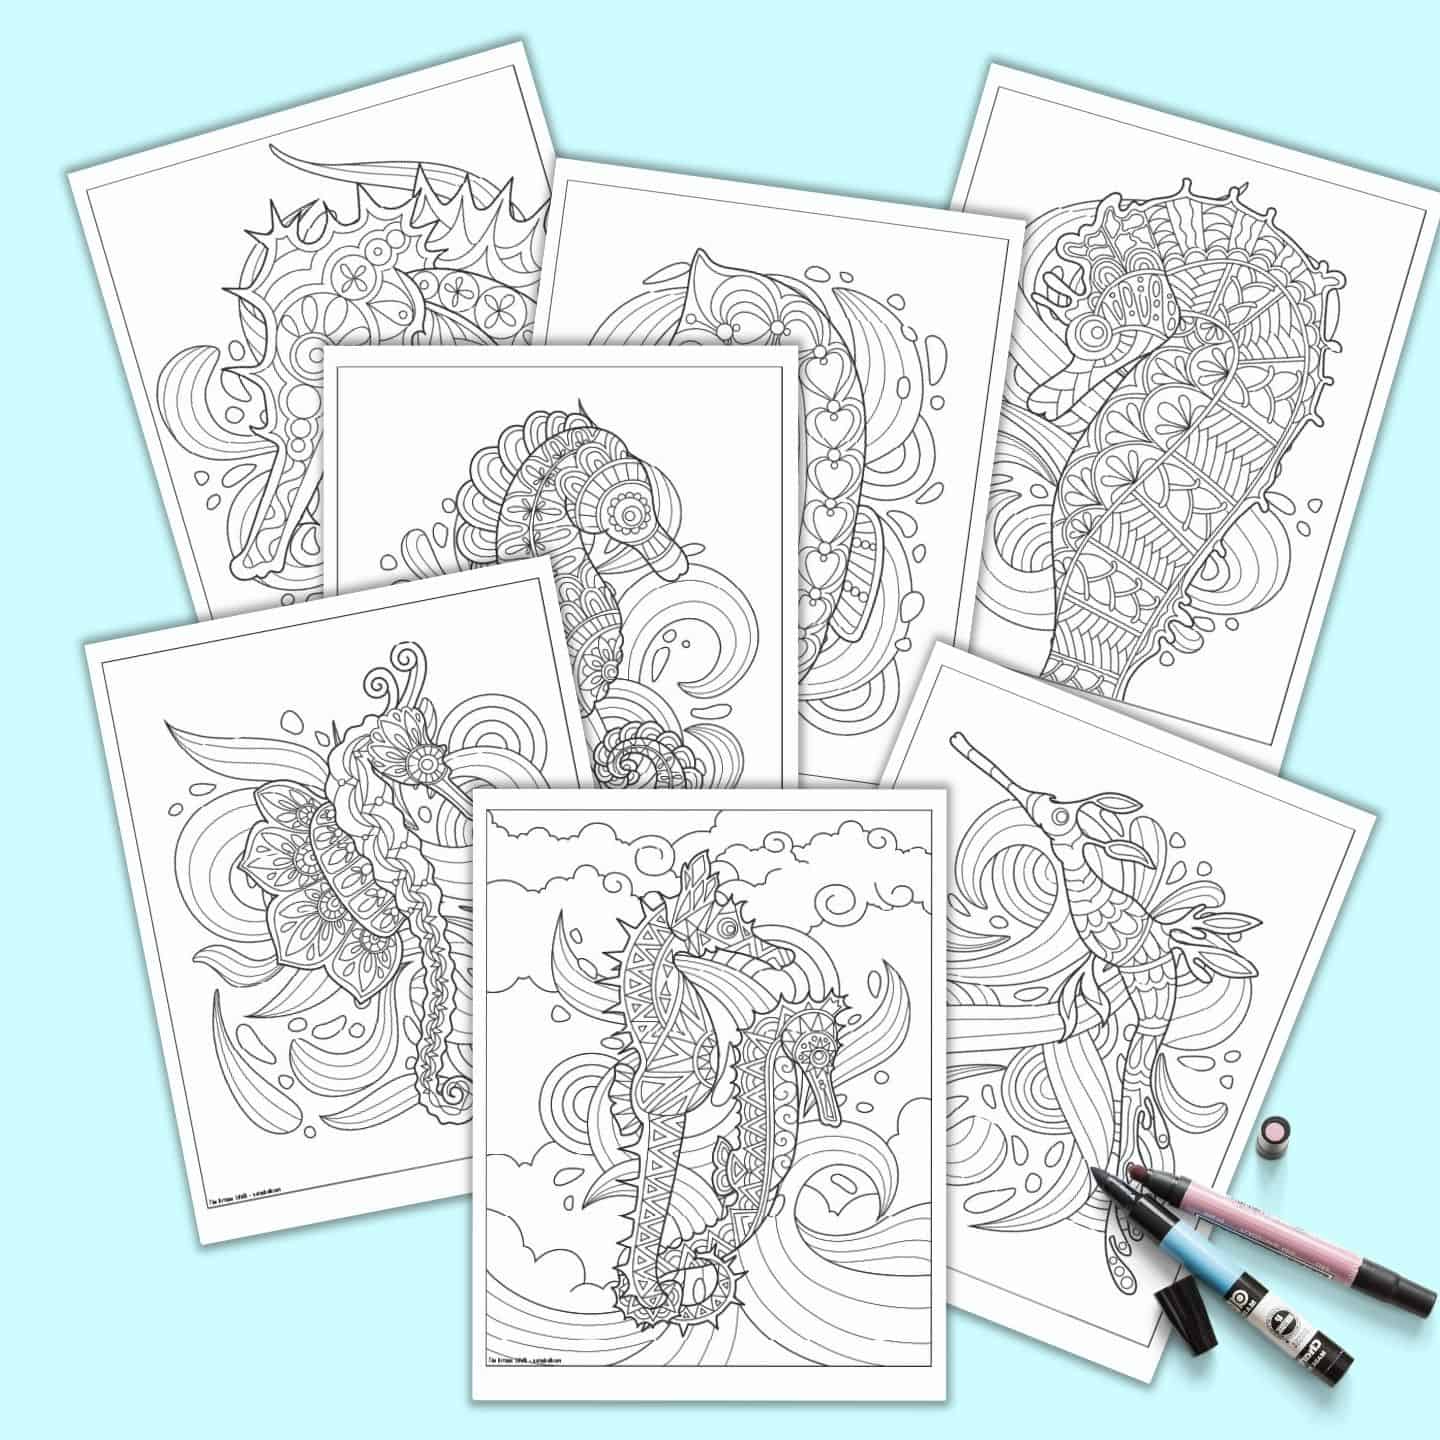 Free Printable Seahorse Mandala Coloring Pages for Adults - The Artisan